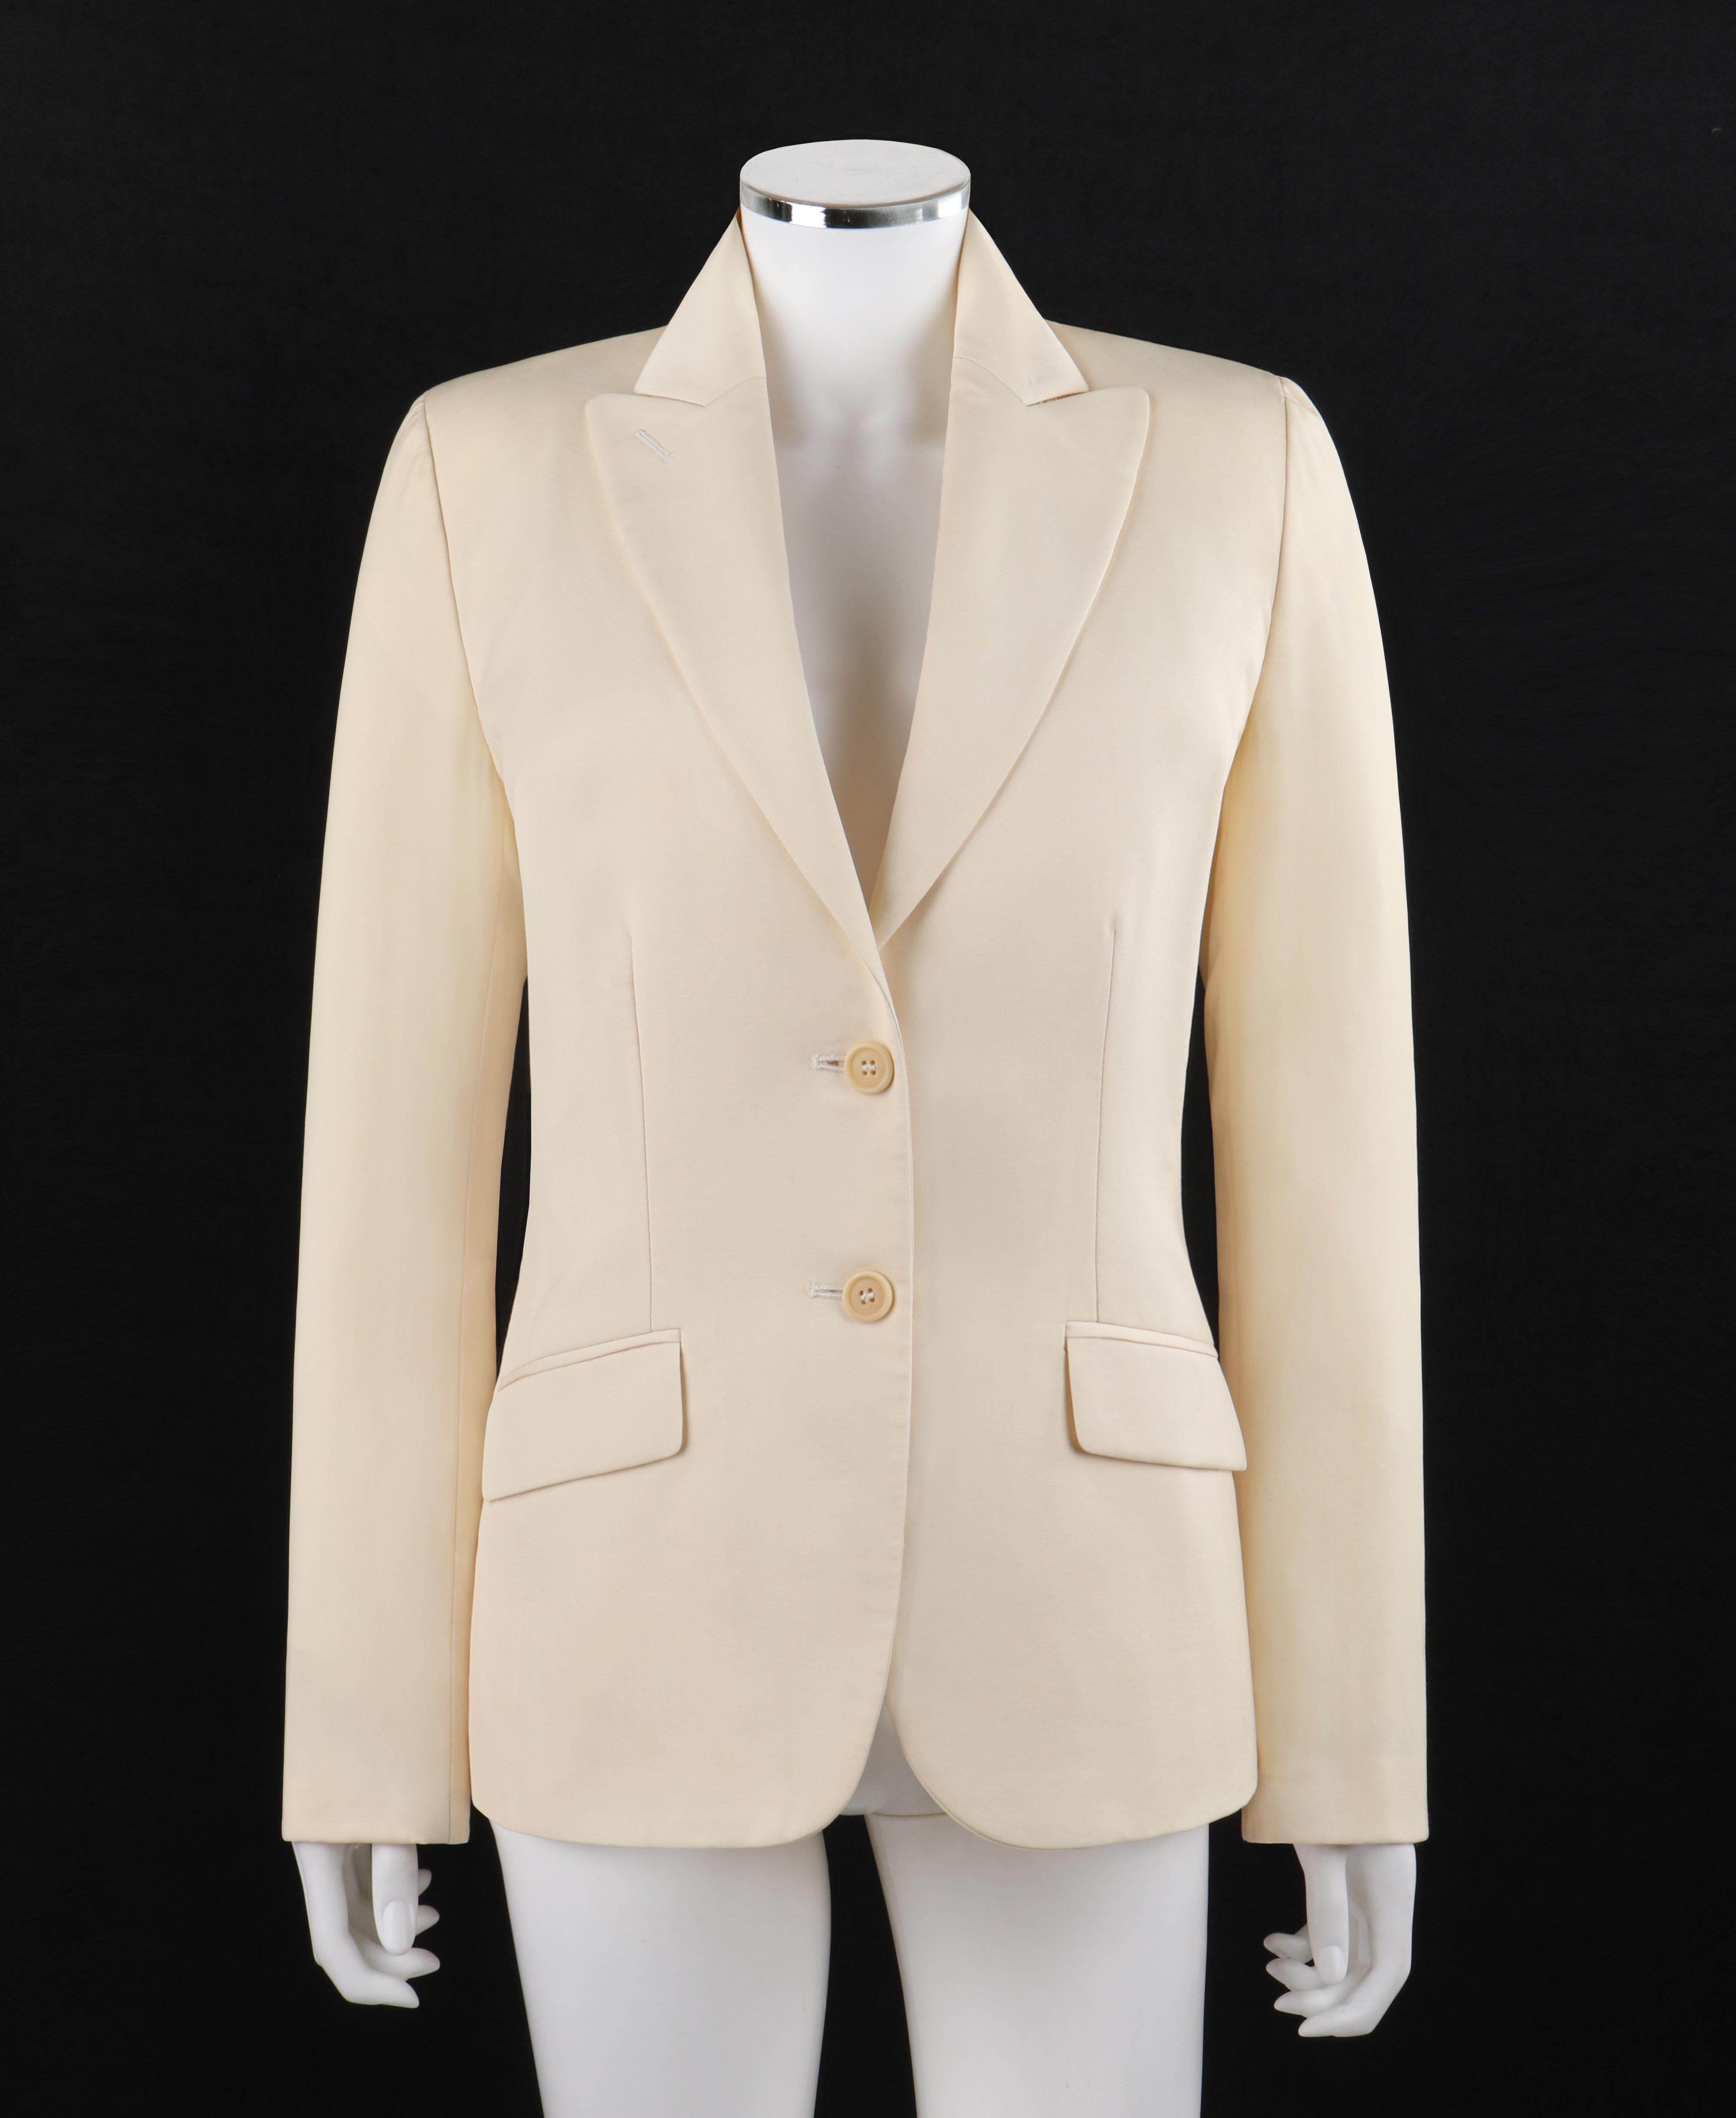 ALEXANDER McQUEEN S/S 1998 Ivory Button Front Notch Collar Slanted Pocket Blazer
 
Brand / Manufacturer: Alexander McQueen
Collection: S/S 1998 
Style: Blazer
Color(s): Shades of ivory
Lined: Yes
Marked Fabric Content: 100% wool
Additional Details /